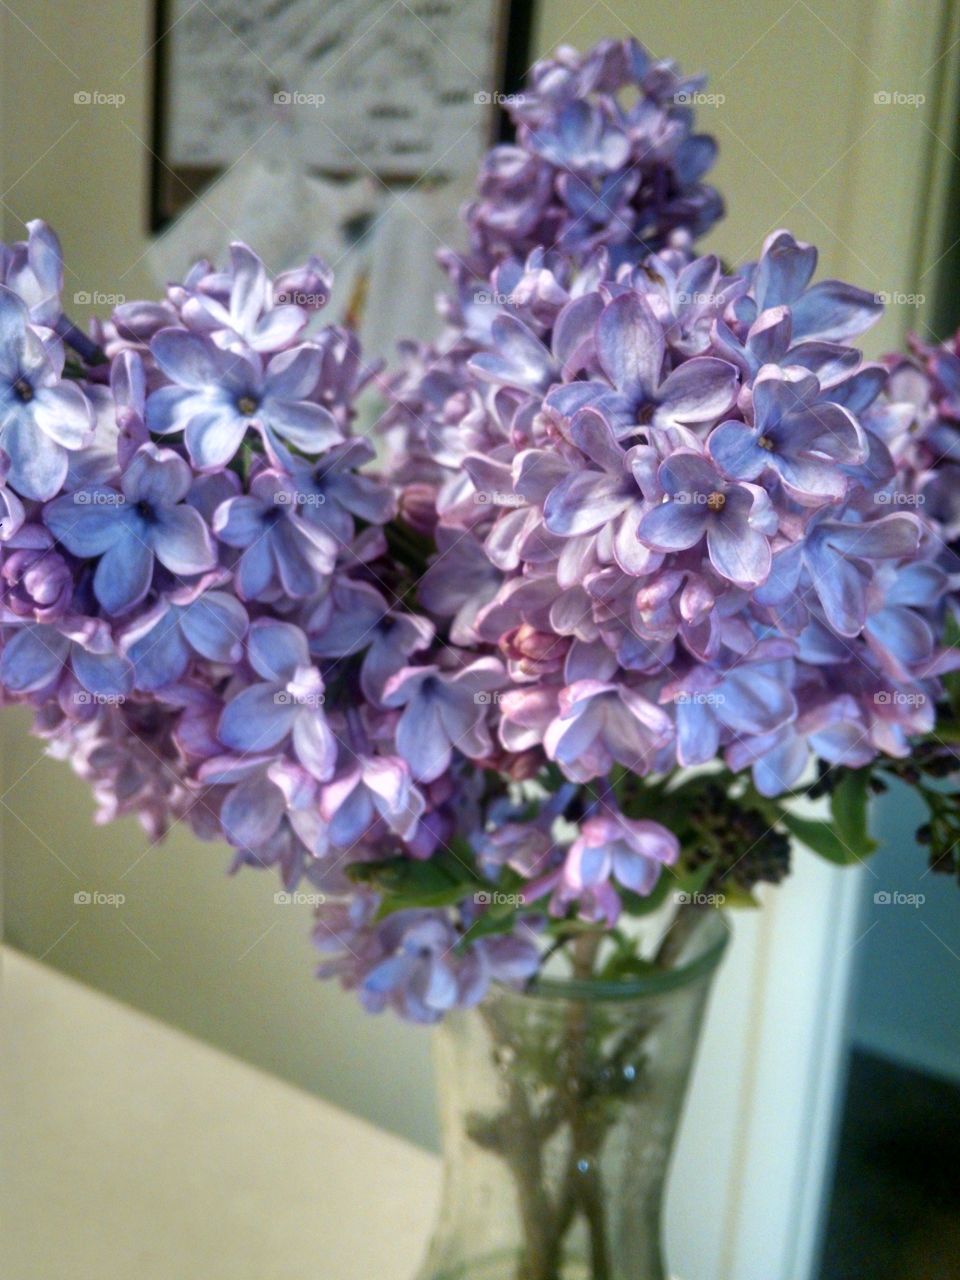 lilacs in the kitchen